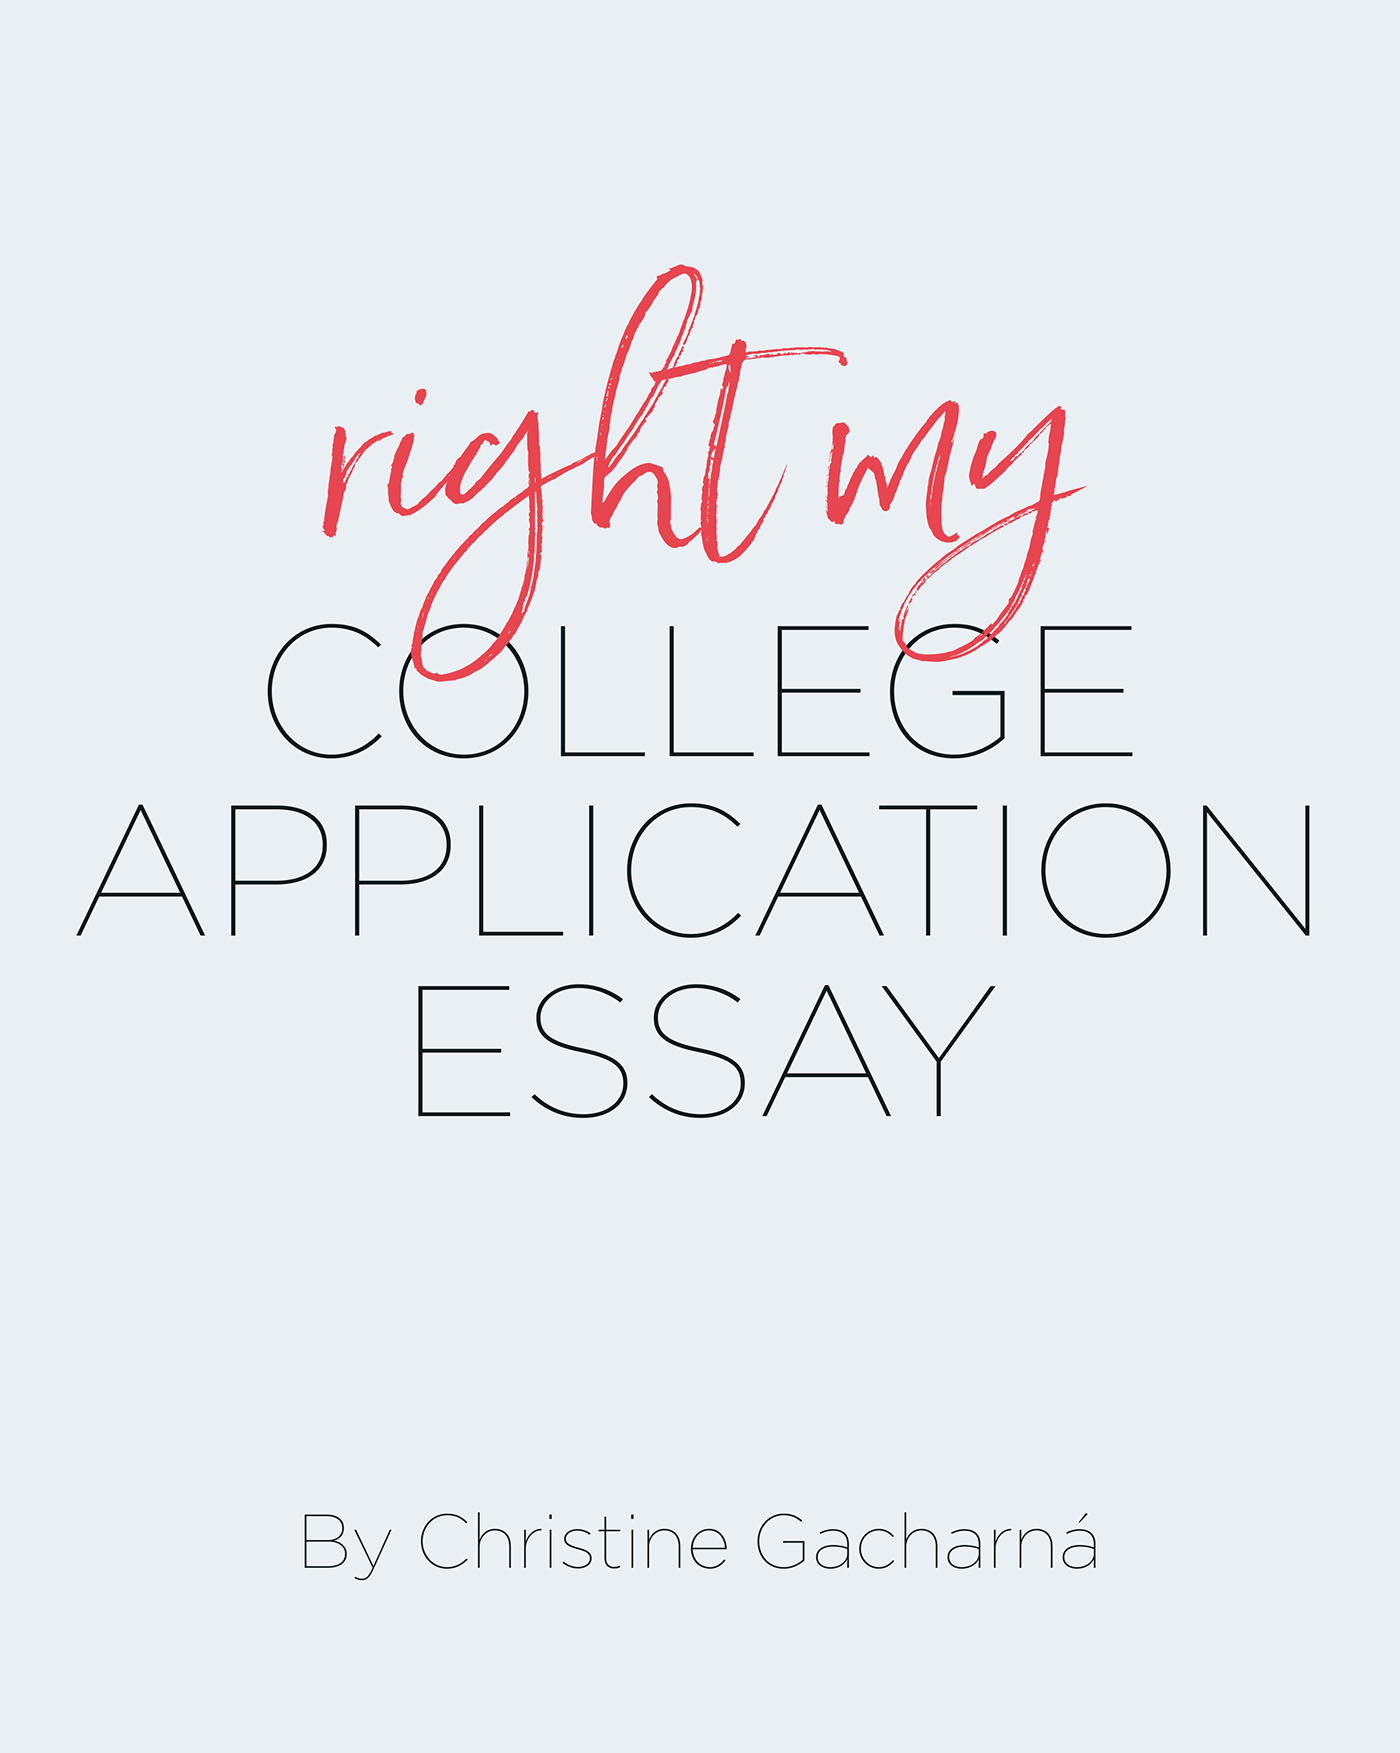 Author Christine Gacharná’s New Book, "Right My College Application Essay," is an Effective Guide for Students Embarking on This New Style of Writing